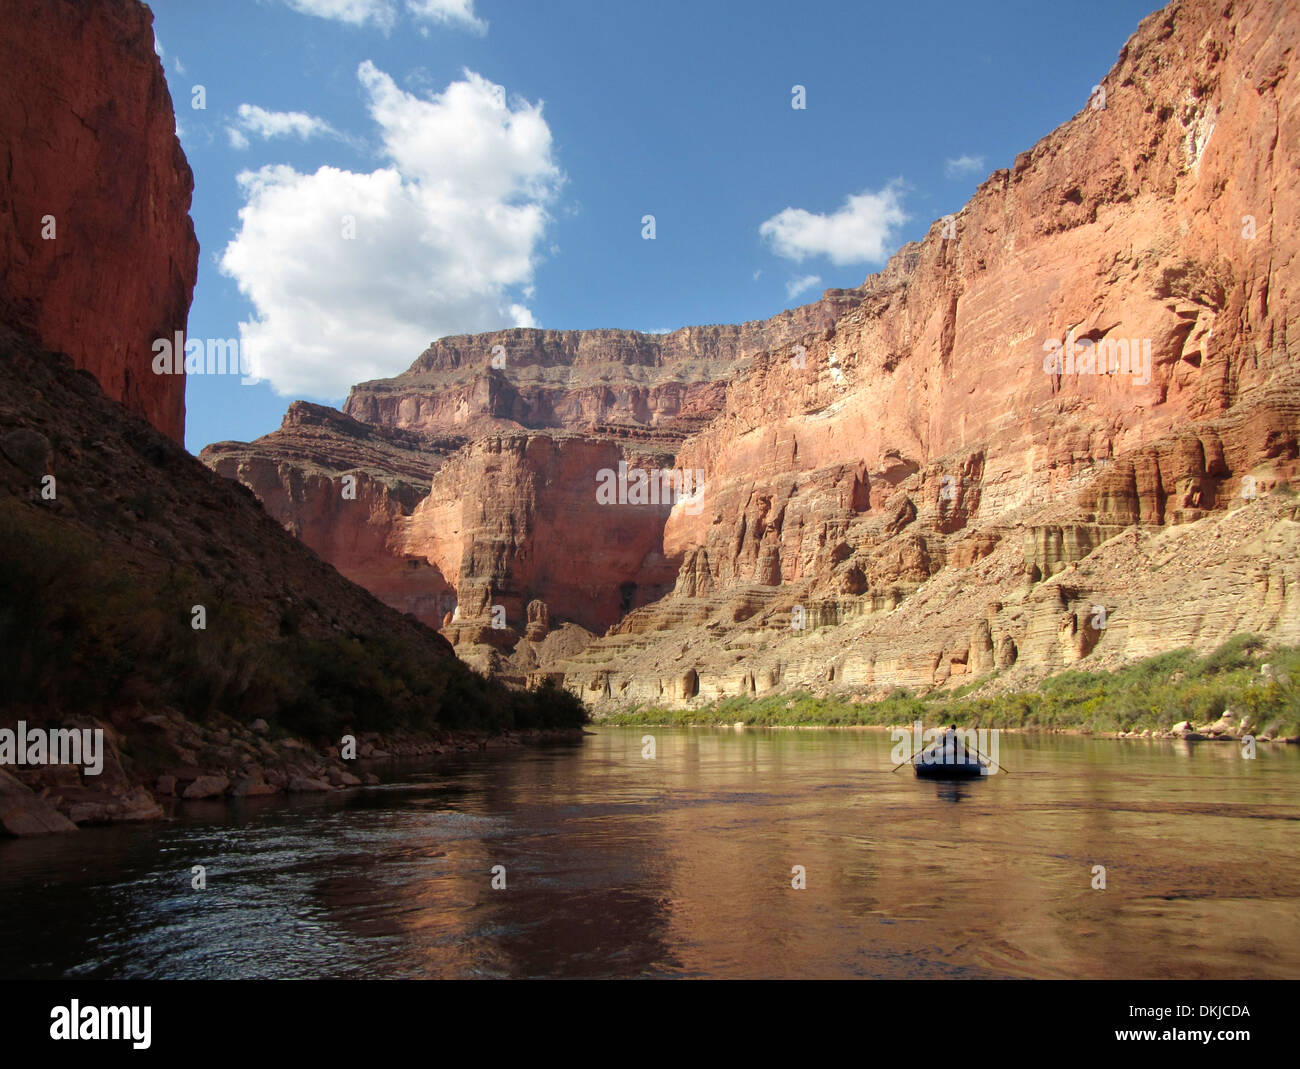 A few rafters in the Redwall area of the Grand Canyon. Stock Photo